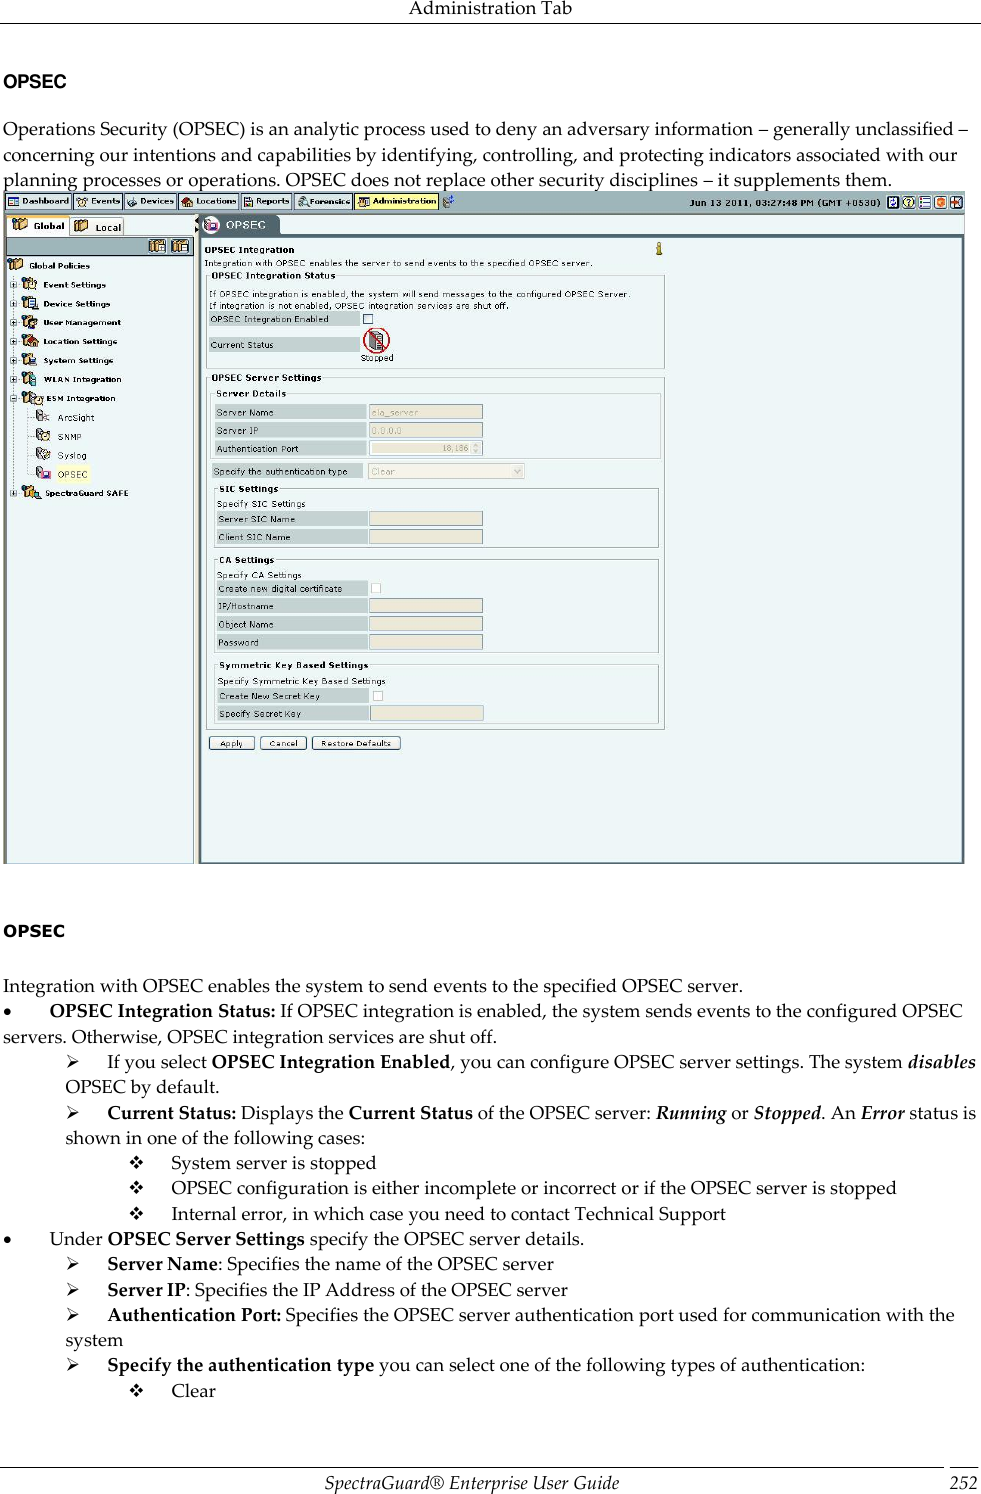 Administration Tab SpectraGuard®  Enterprise User Guide 252 OPSEC Operations Security (OPSEC) is an analytic process used to deny an adversary information – generally unclassified – concerning our intentions and capabilities by identifying, controlling, and protecting indicators associated with our planning processes or operations. OPSEC does not replace other security disciplines – it supplements them.      OPSEC   Integration with OPSEC enables the system to send events to the specified OPSEC server.           OPSEC Integration Status: If OPSEC integration is enabled, the system sends events to the configured OPSEC servers. Otherwise, OPSEC integration services are shut off.        If you select OPSEC Integration Enabled, you can configure OPSEC server settings. The system disables OPSEC by default.        Current Status: Displays the Current Status of the OPSEC server: Running or Stopped. An Error status is shown in one of the following cases:        System server is stopped        OPSEC configuration is either incomplete or incorrect or if the OPSEC server is stopped        Internal error, in which case you need to contact Technical Support           Under OPSEC Server Settings specify the OPSEC server details.        Server Name: Specifies the name of the OPSEC server        Server IP: Specifies the IP Address of the OPSEC server        Authentication Port: Specifies the OPSEC server authentication port used for communication with the system        Specify the authentication type you can select one of the following types of authentication:        Clear 